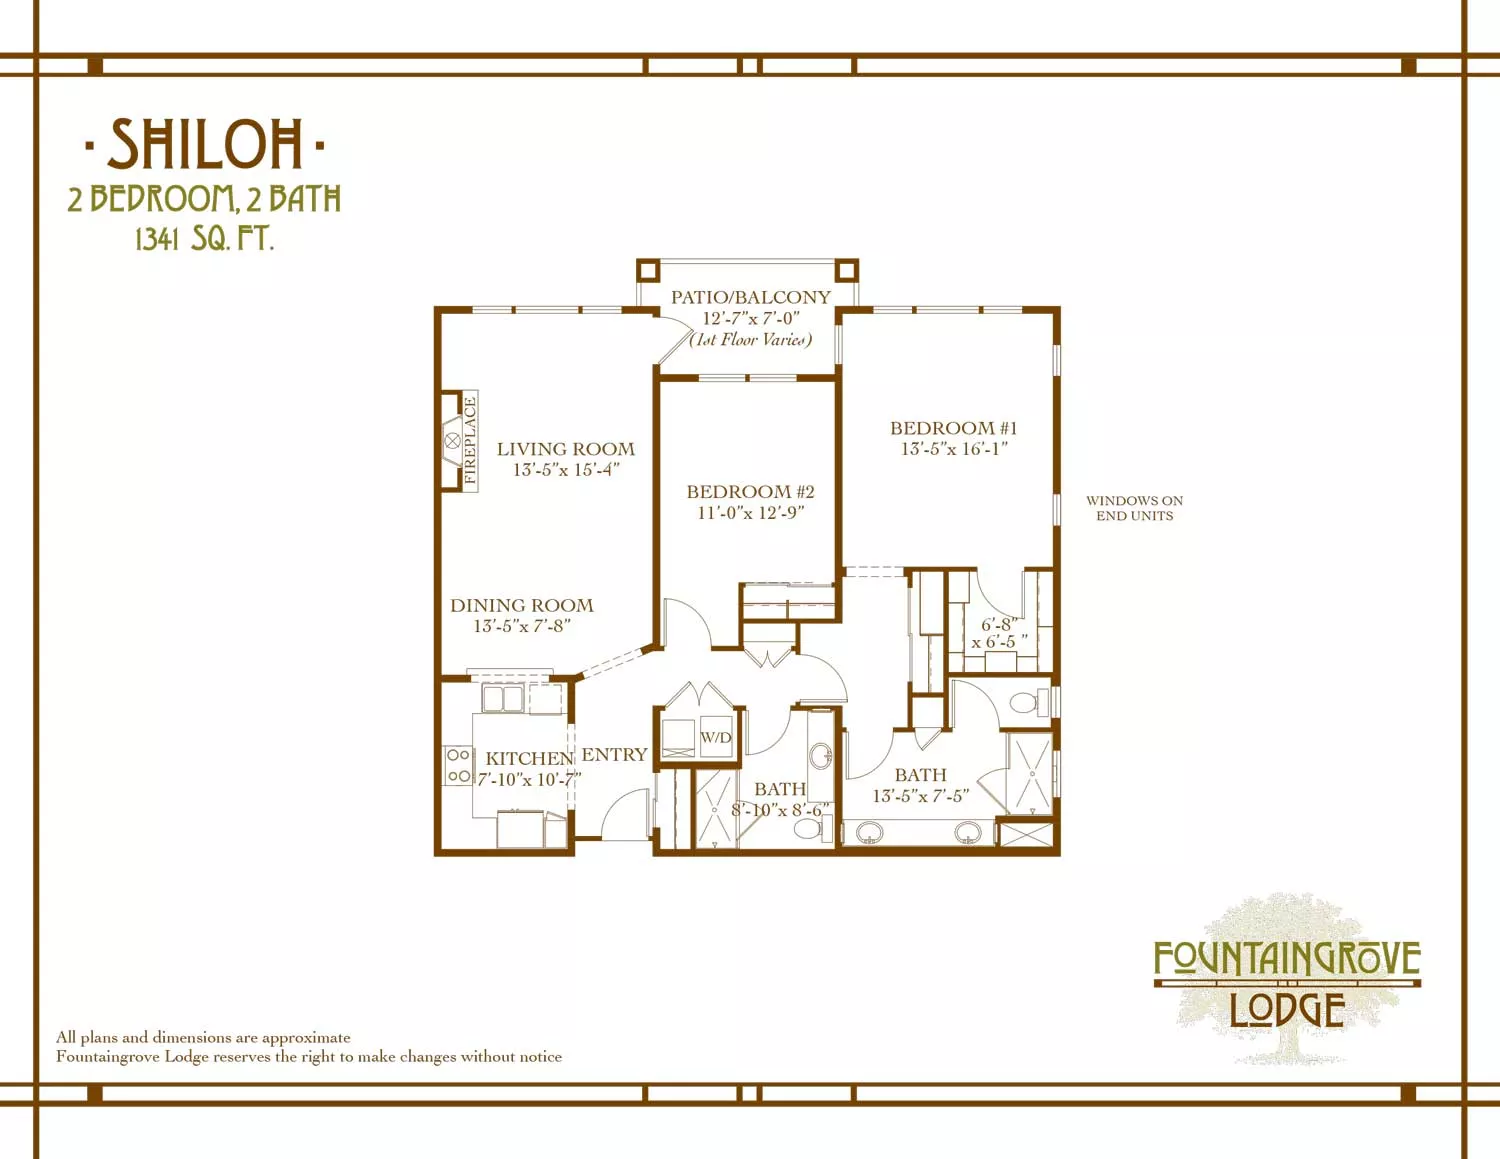 Shiloh Two Bedroom and Two Bath floor plan